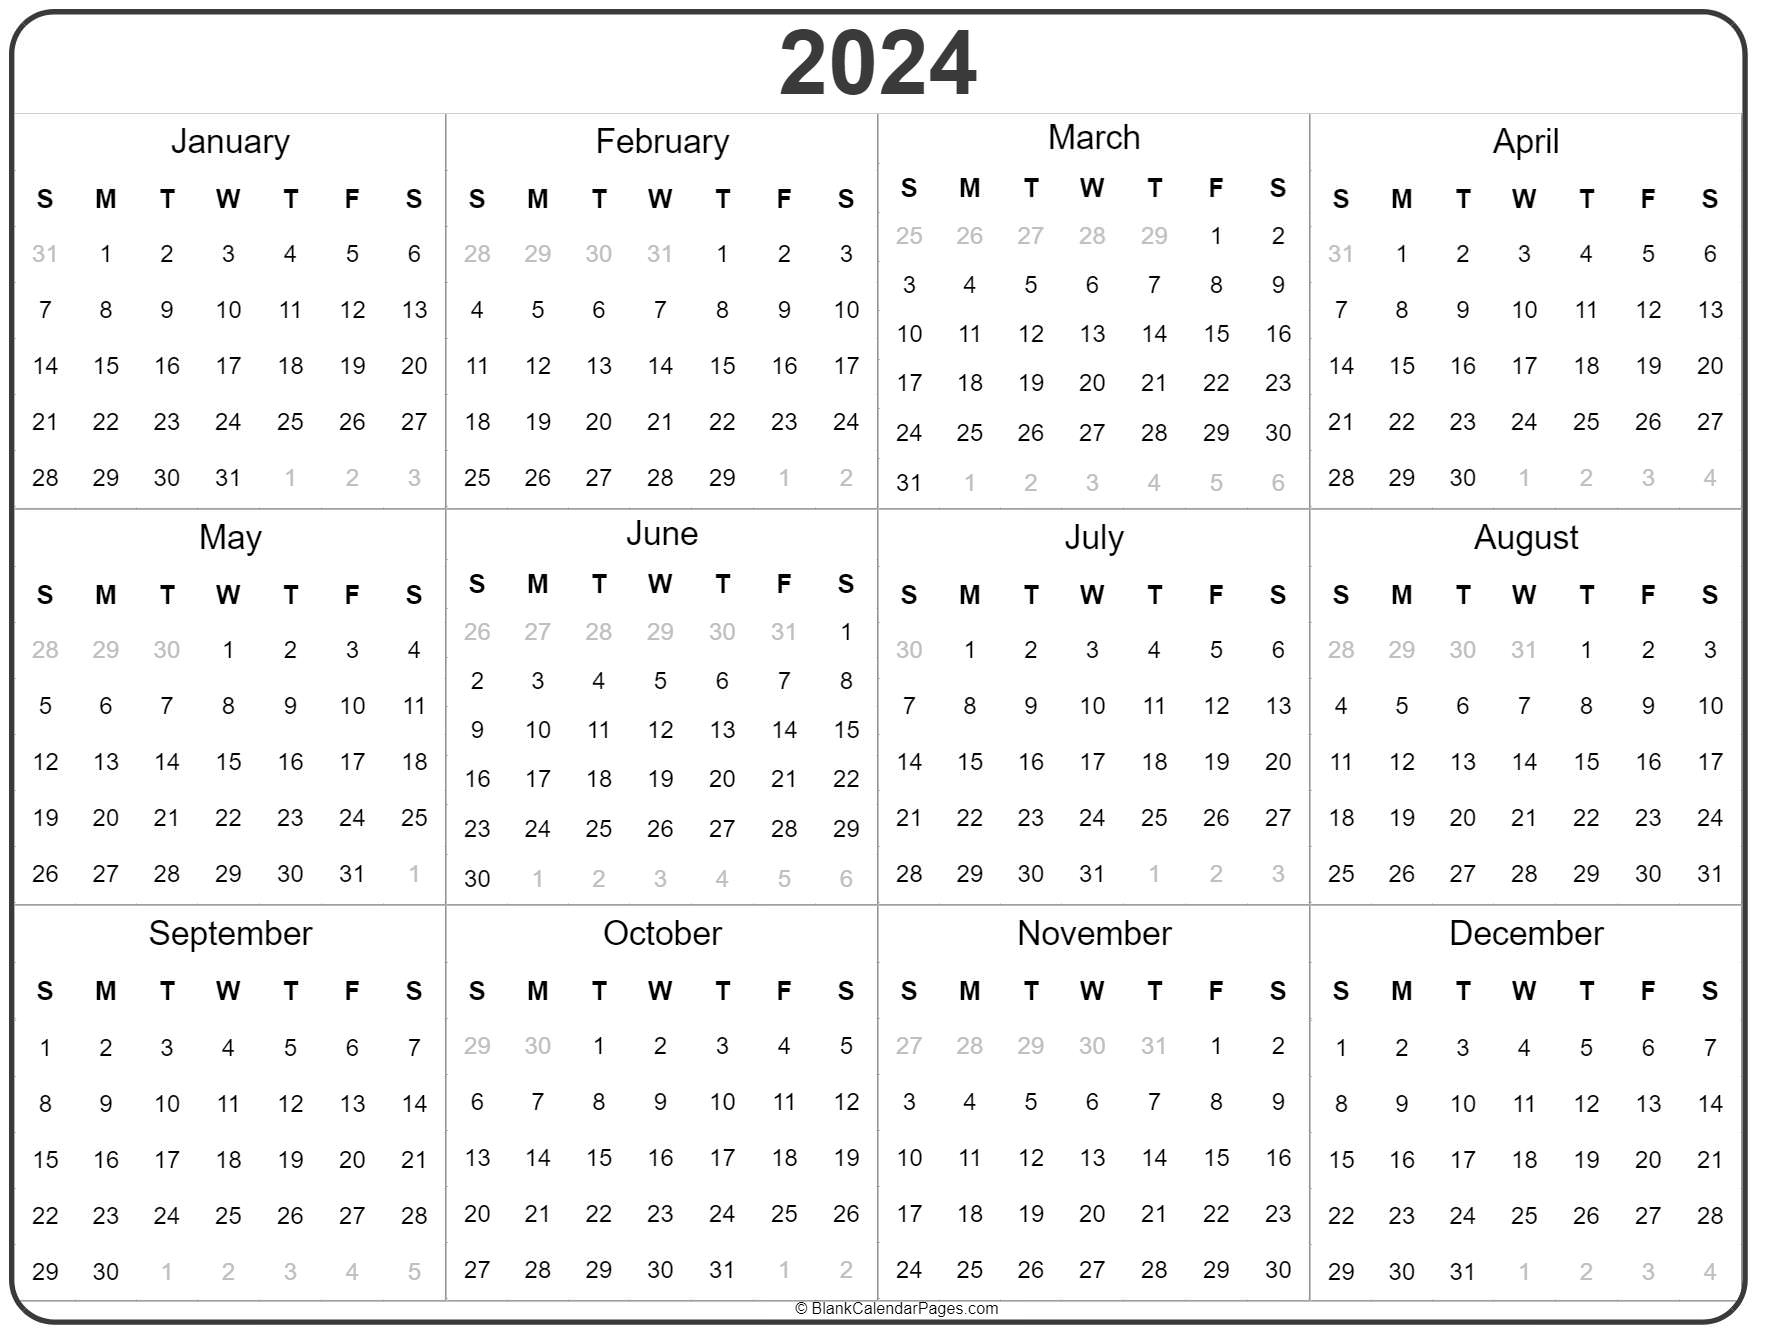 2024 Calendar In One Page Ericka Priscilla - Free Printable 2024 1 Page Calendar With Mountains